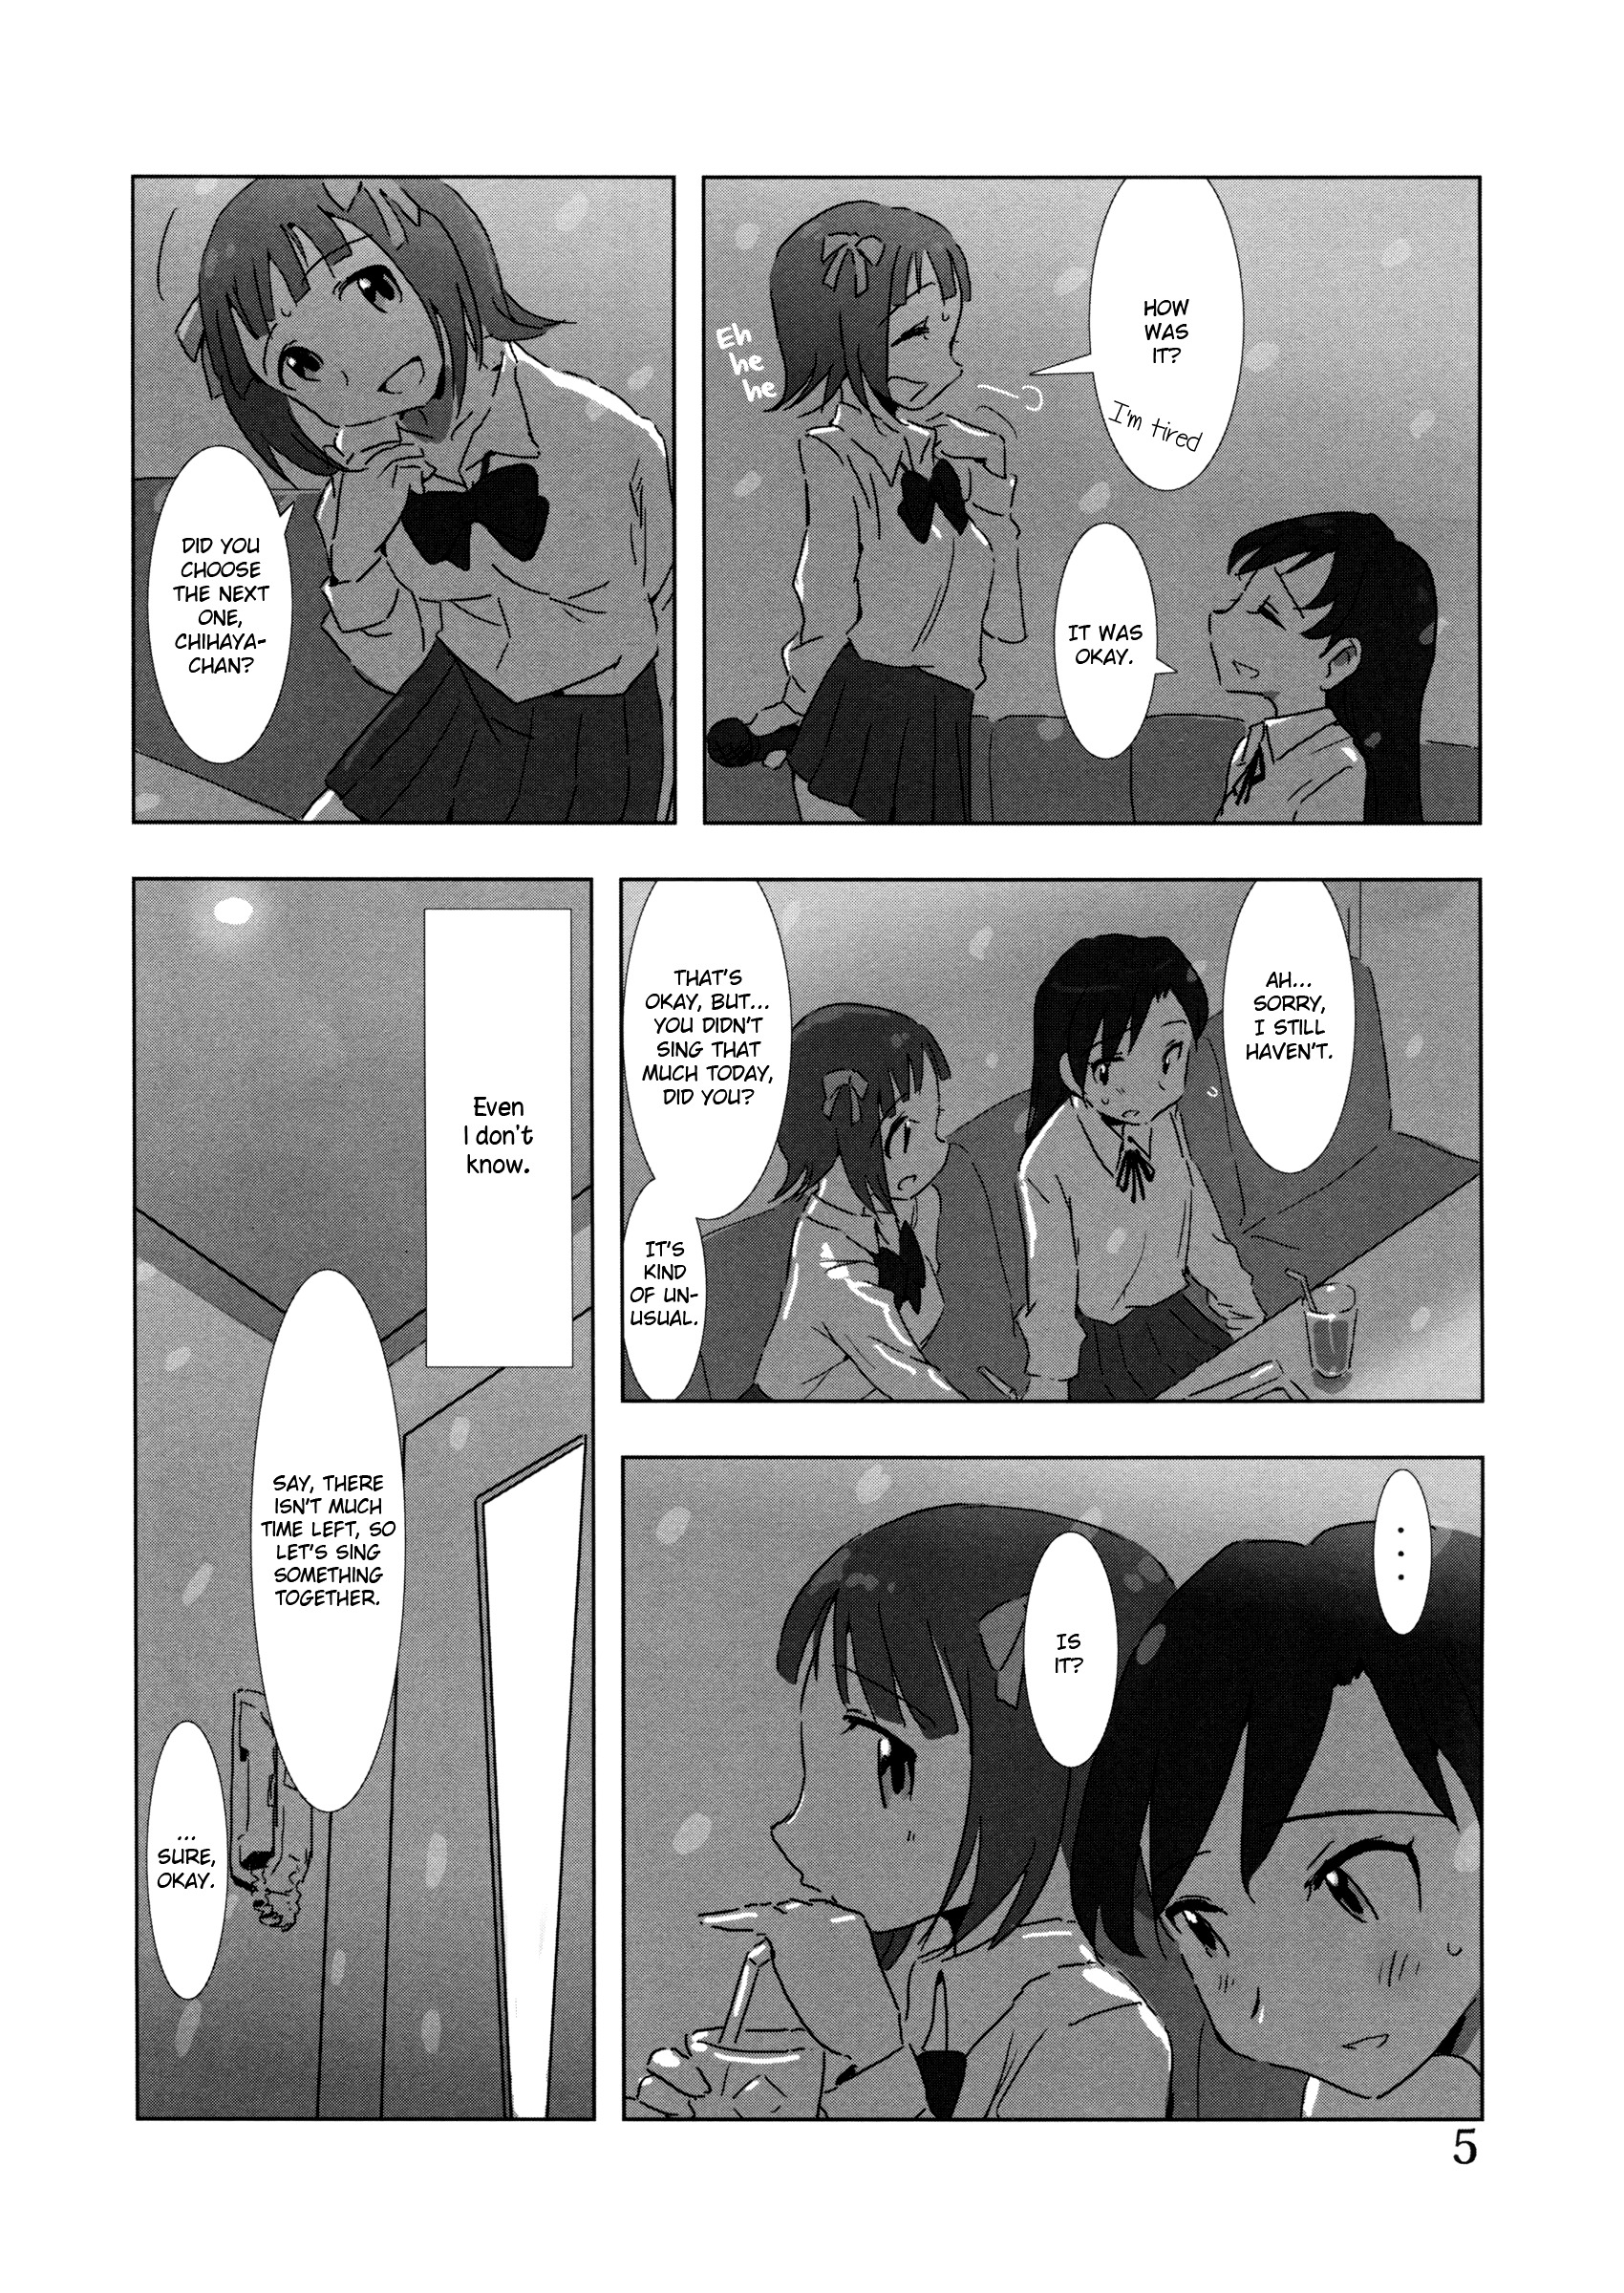 Yuri Yuri Idolm@ster: I Want To Hold You - Page 5